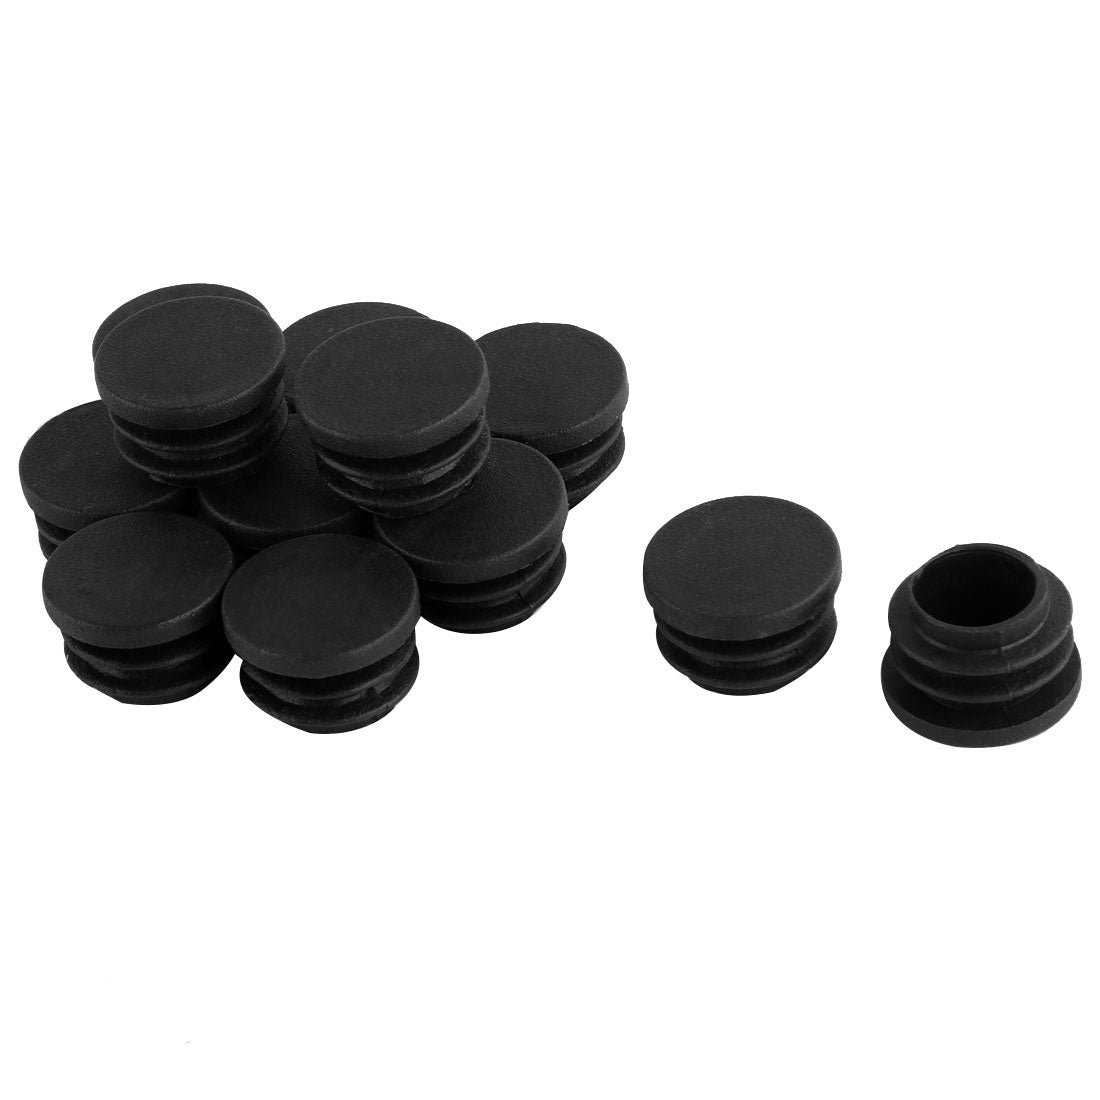 uxcell Uxcell Furniture Table Chair Legs Plastic Round Tube Pipe Insert Cap Cover Stopper Black 22mm Dia 12pcs